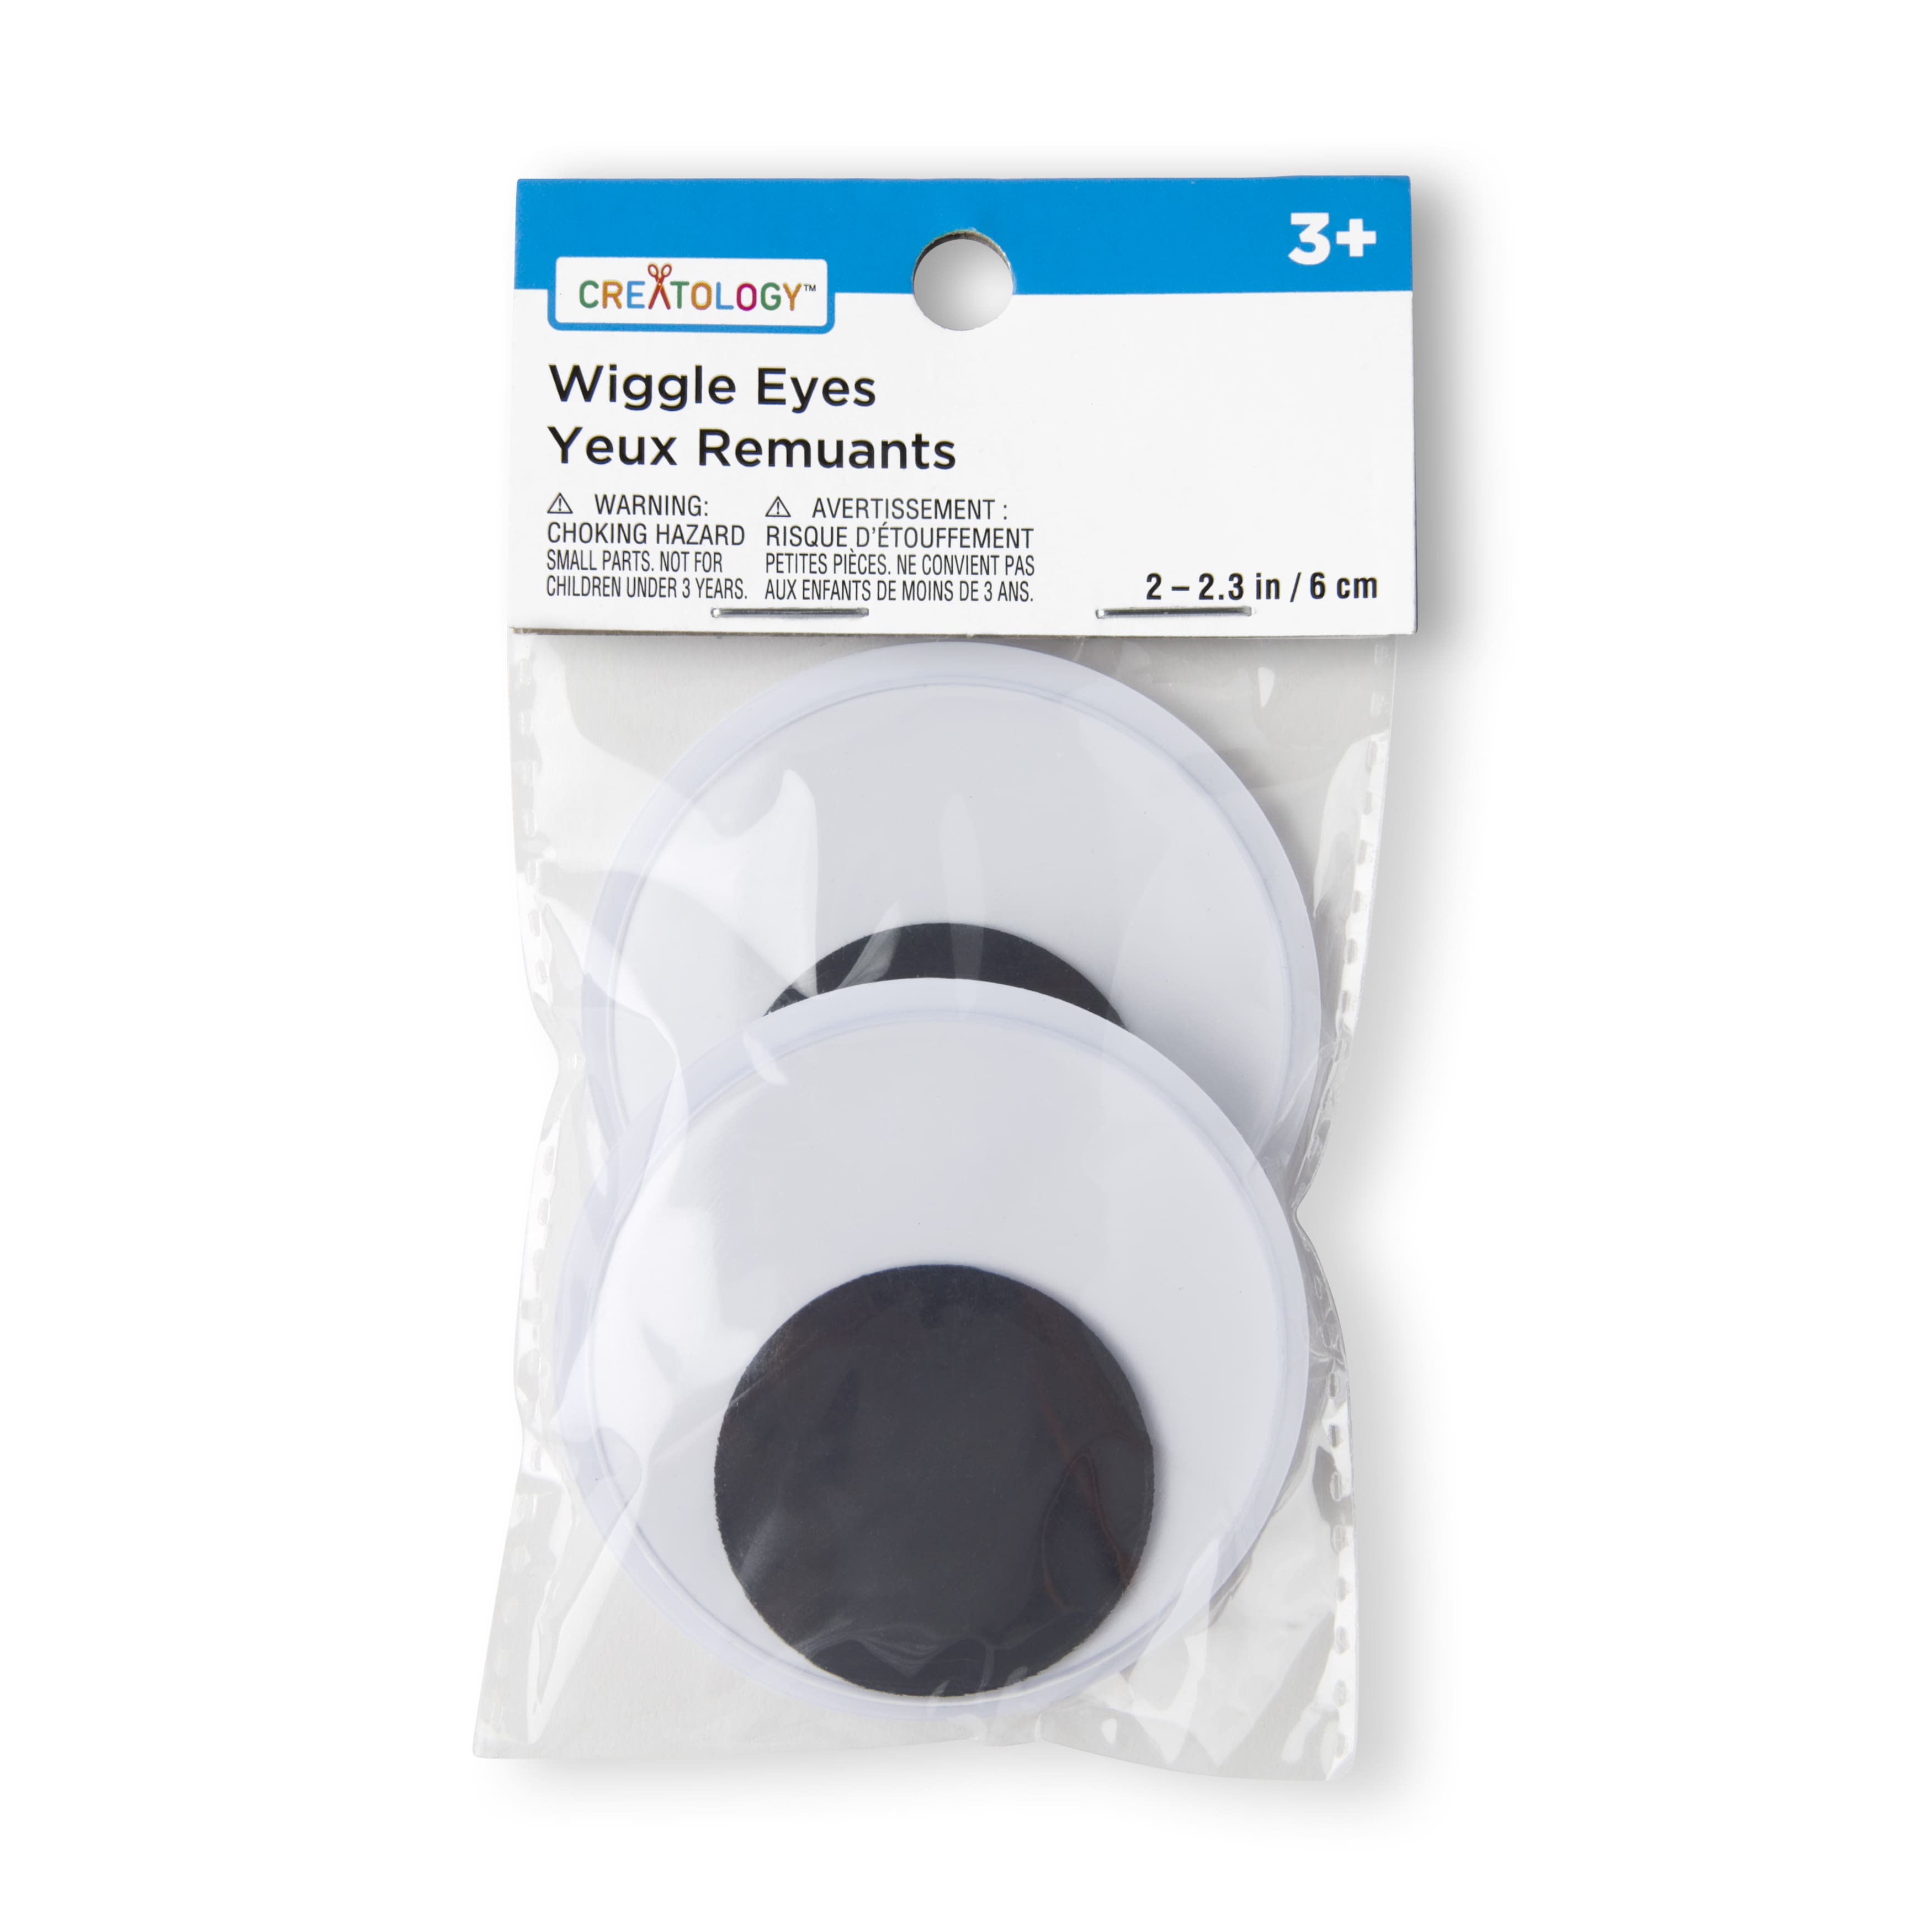 2.3 Wiggle Eyes, 2ct. by Creatology™